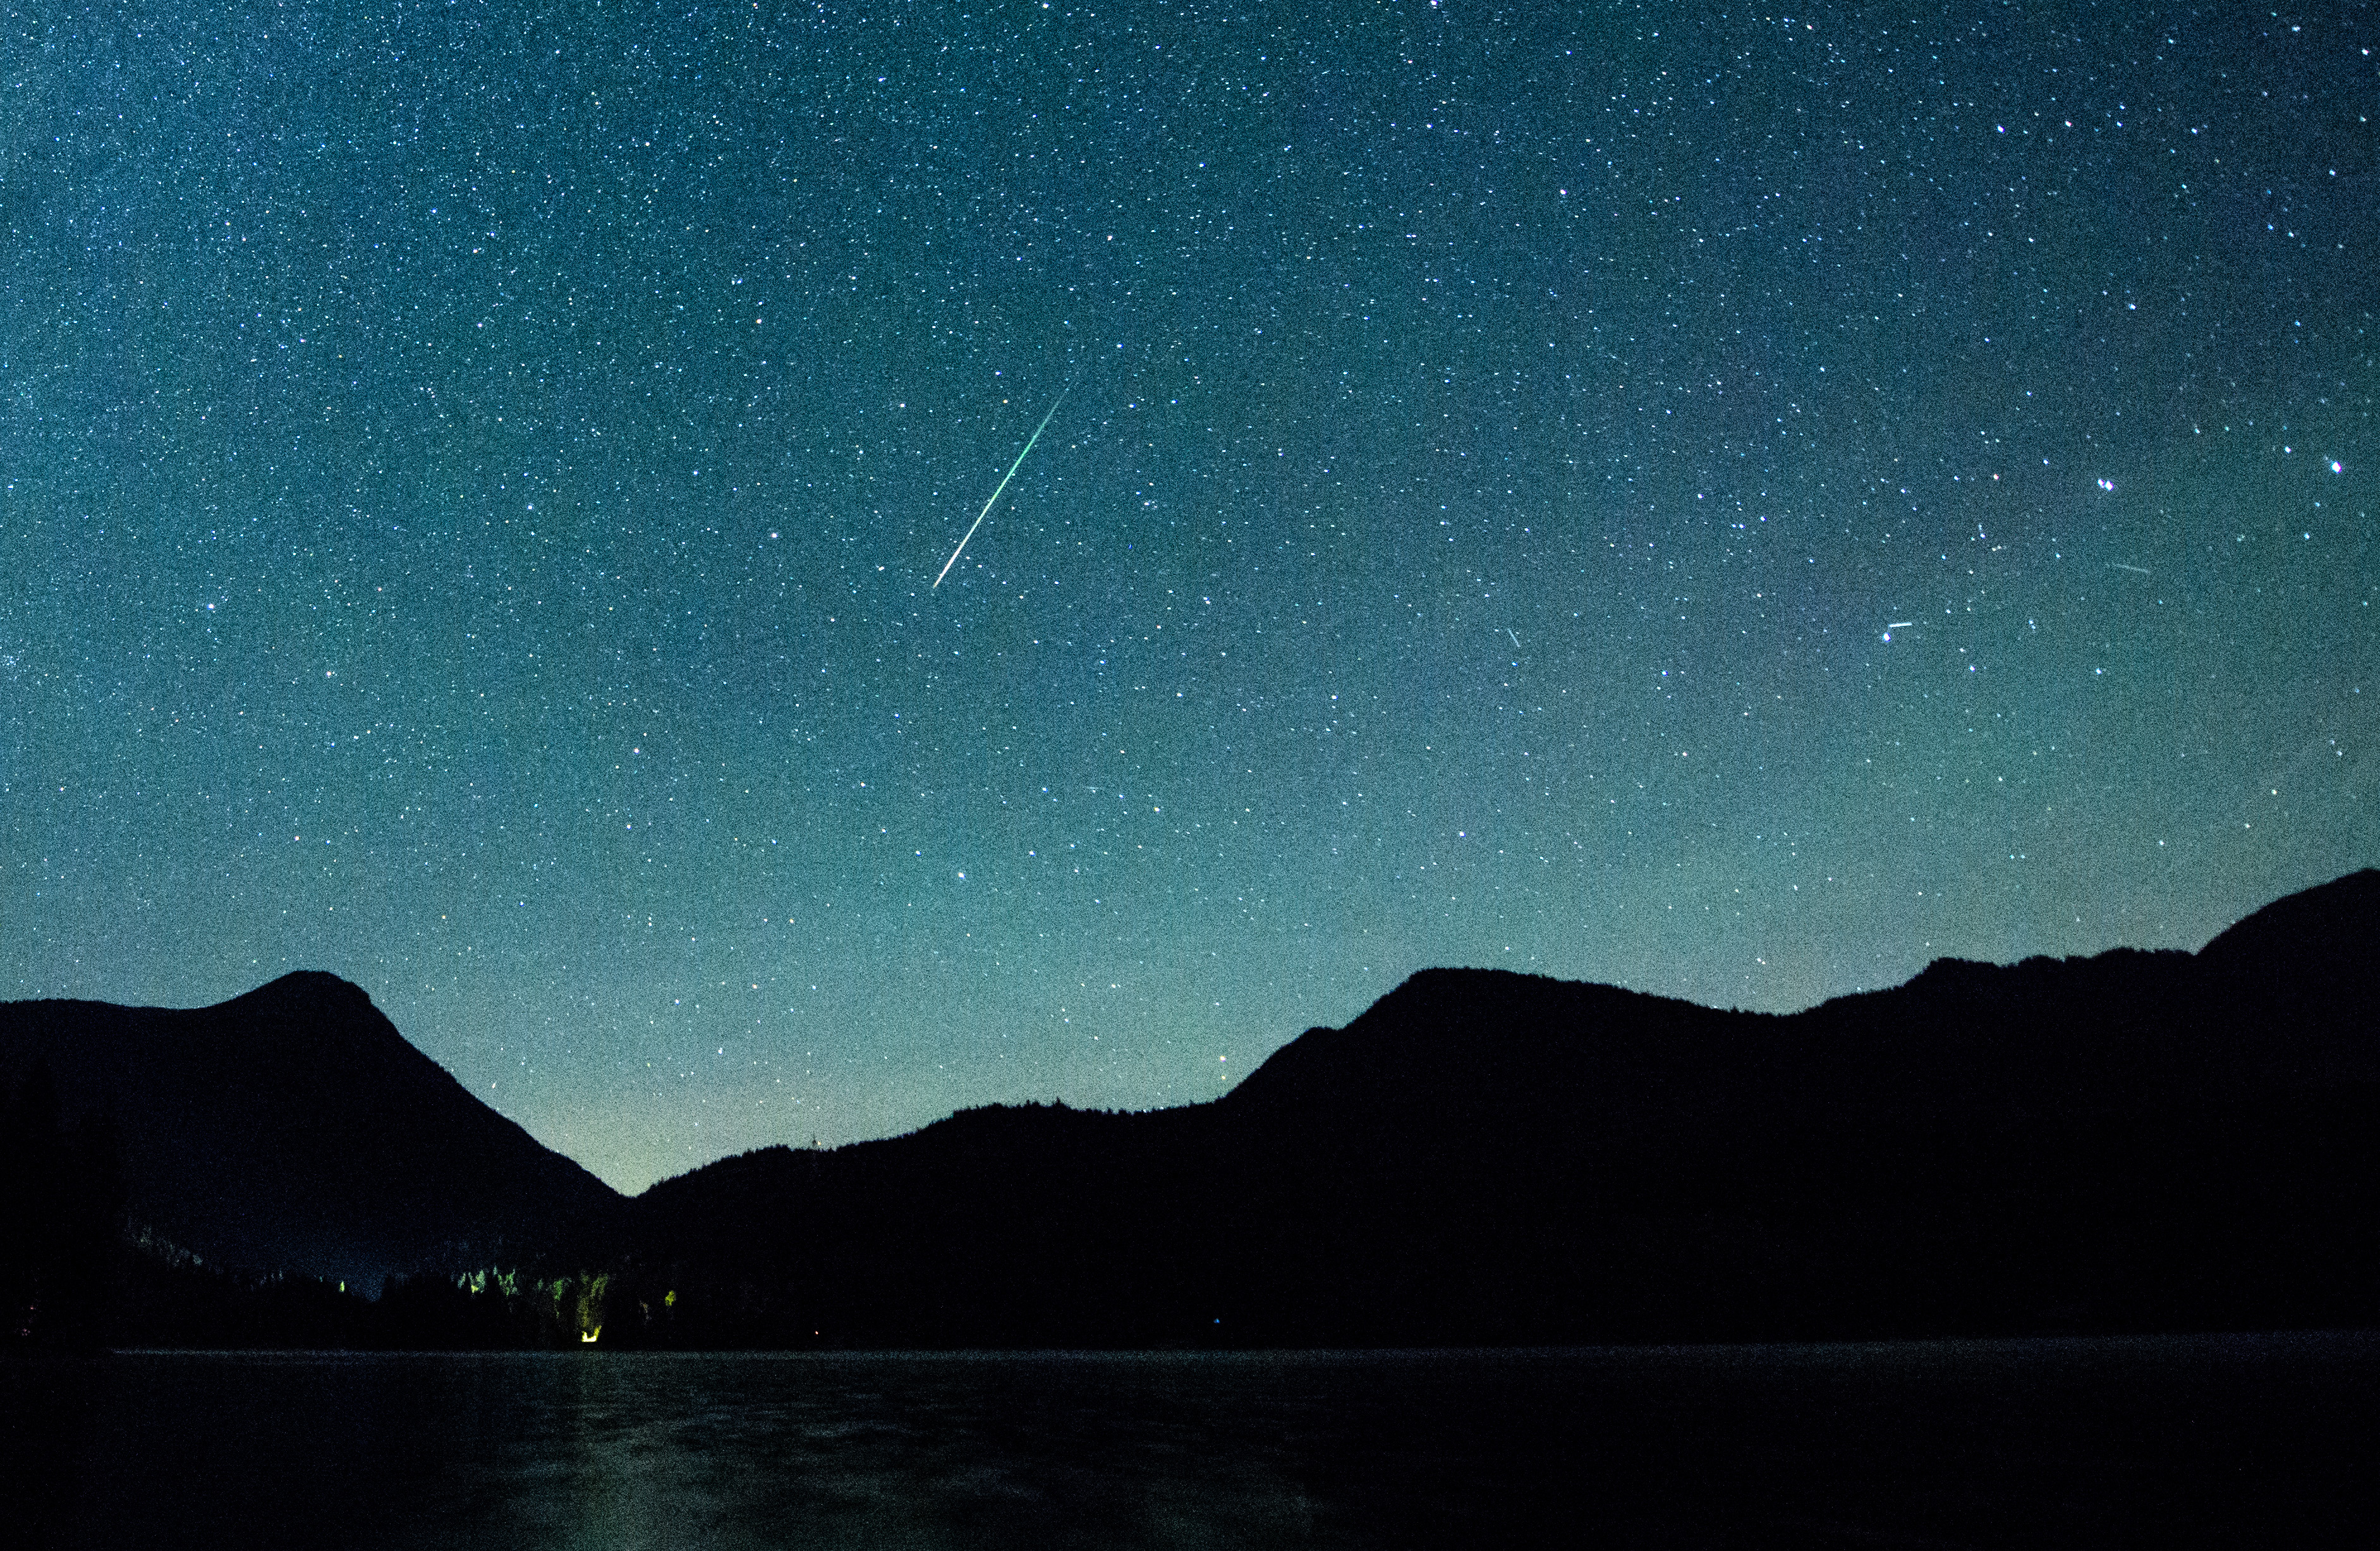 12 August 2018, Germany, Einsiedl: A shooting star appears next to the Milky Way in the sky above Walchensee. Every year in August numerous shooting stars can be seen in the shooting star showers of the Perseids. (picture alliance&mdash; Getty Images)